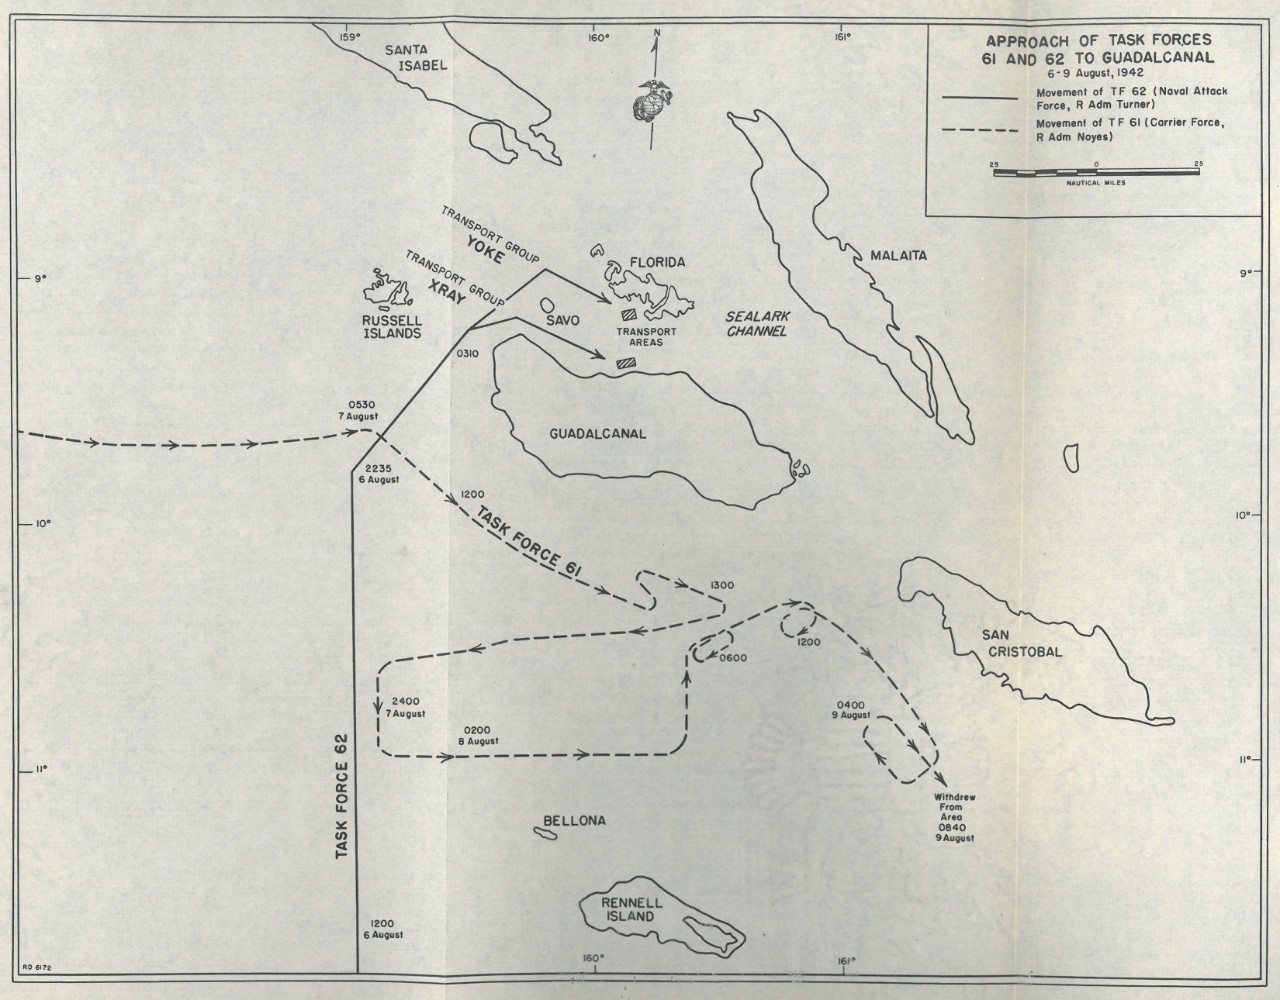 Map 2: Approach of Task Forces 61 & 62 to Guadalcanal 